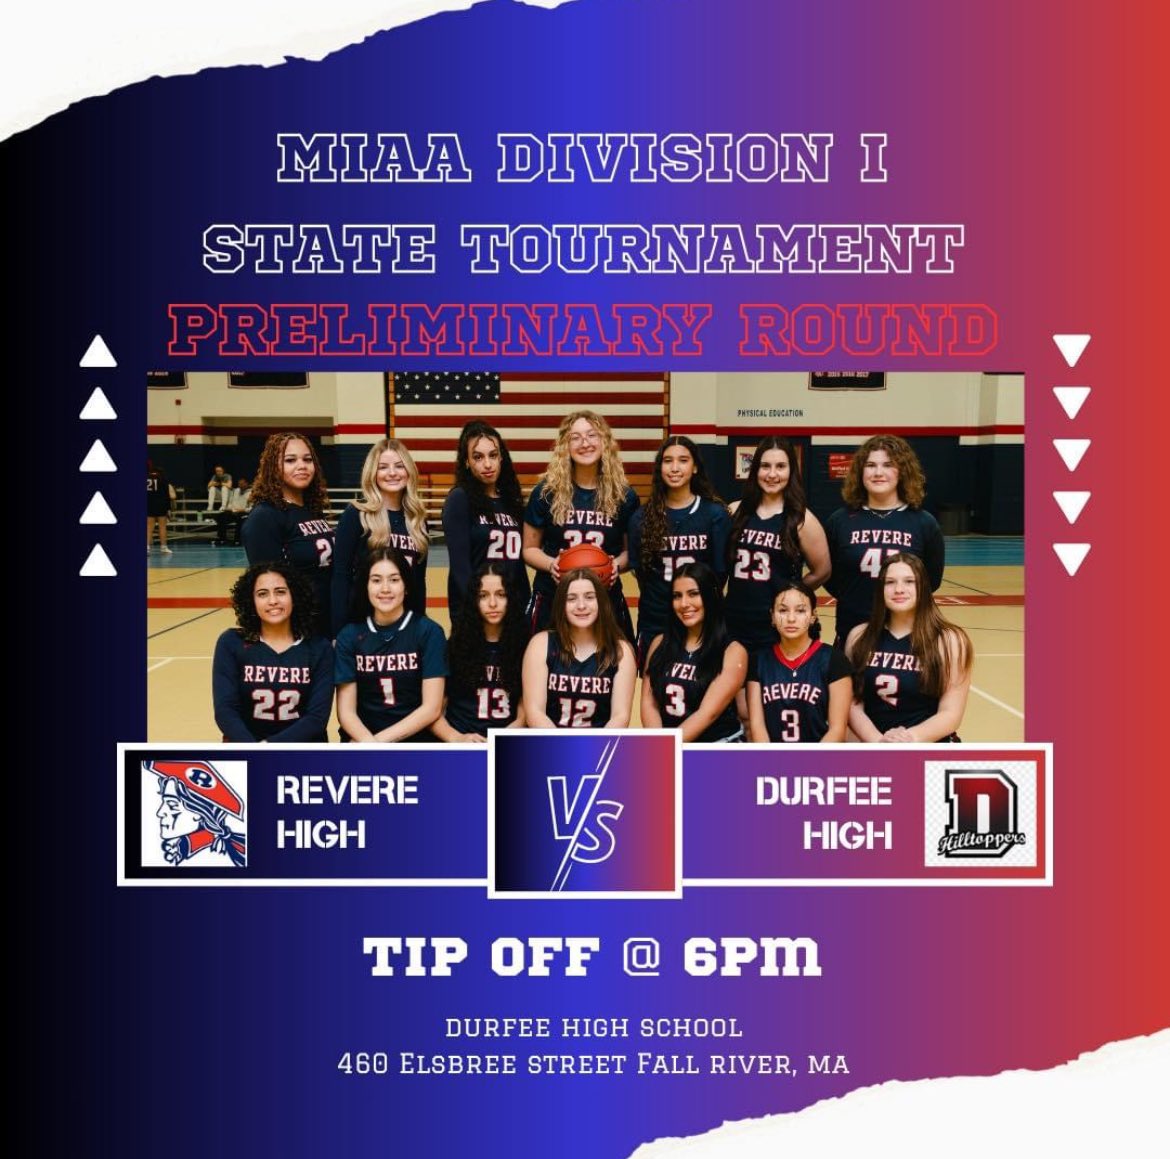 Good luck tonight to our Revere Girls Basketball team and coaches at Durfee High School 6pm!!! #REVEREPRIDE #MIAA #D1TOURNAMENT @LeagueBoston